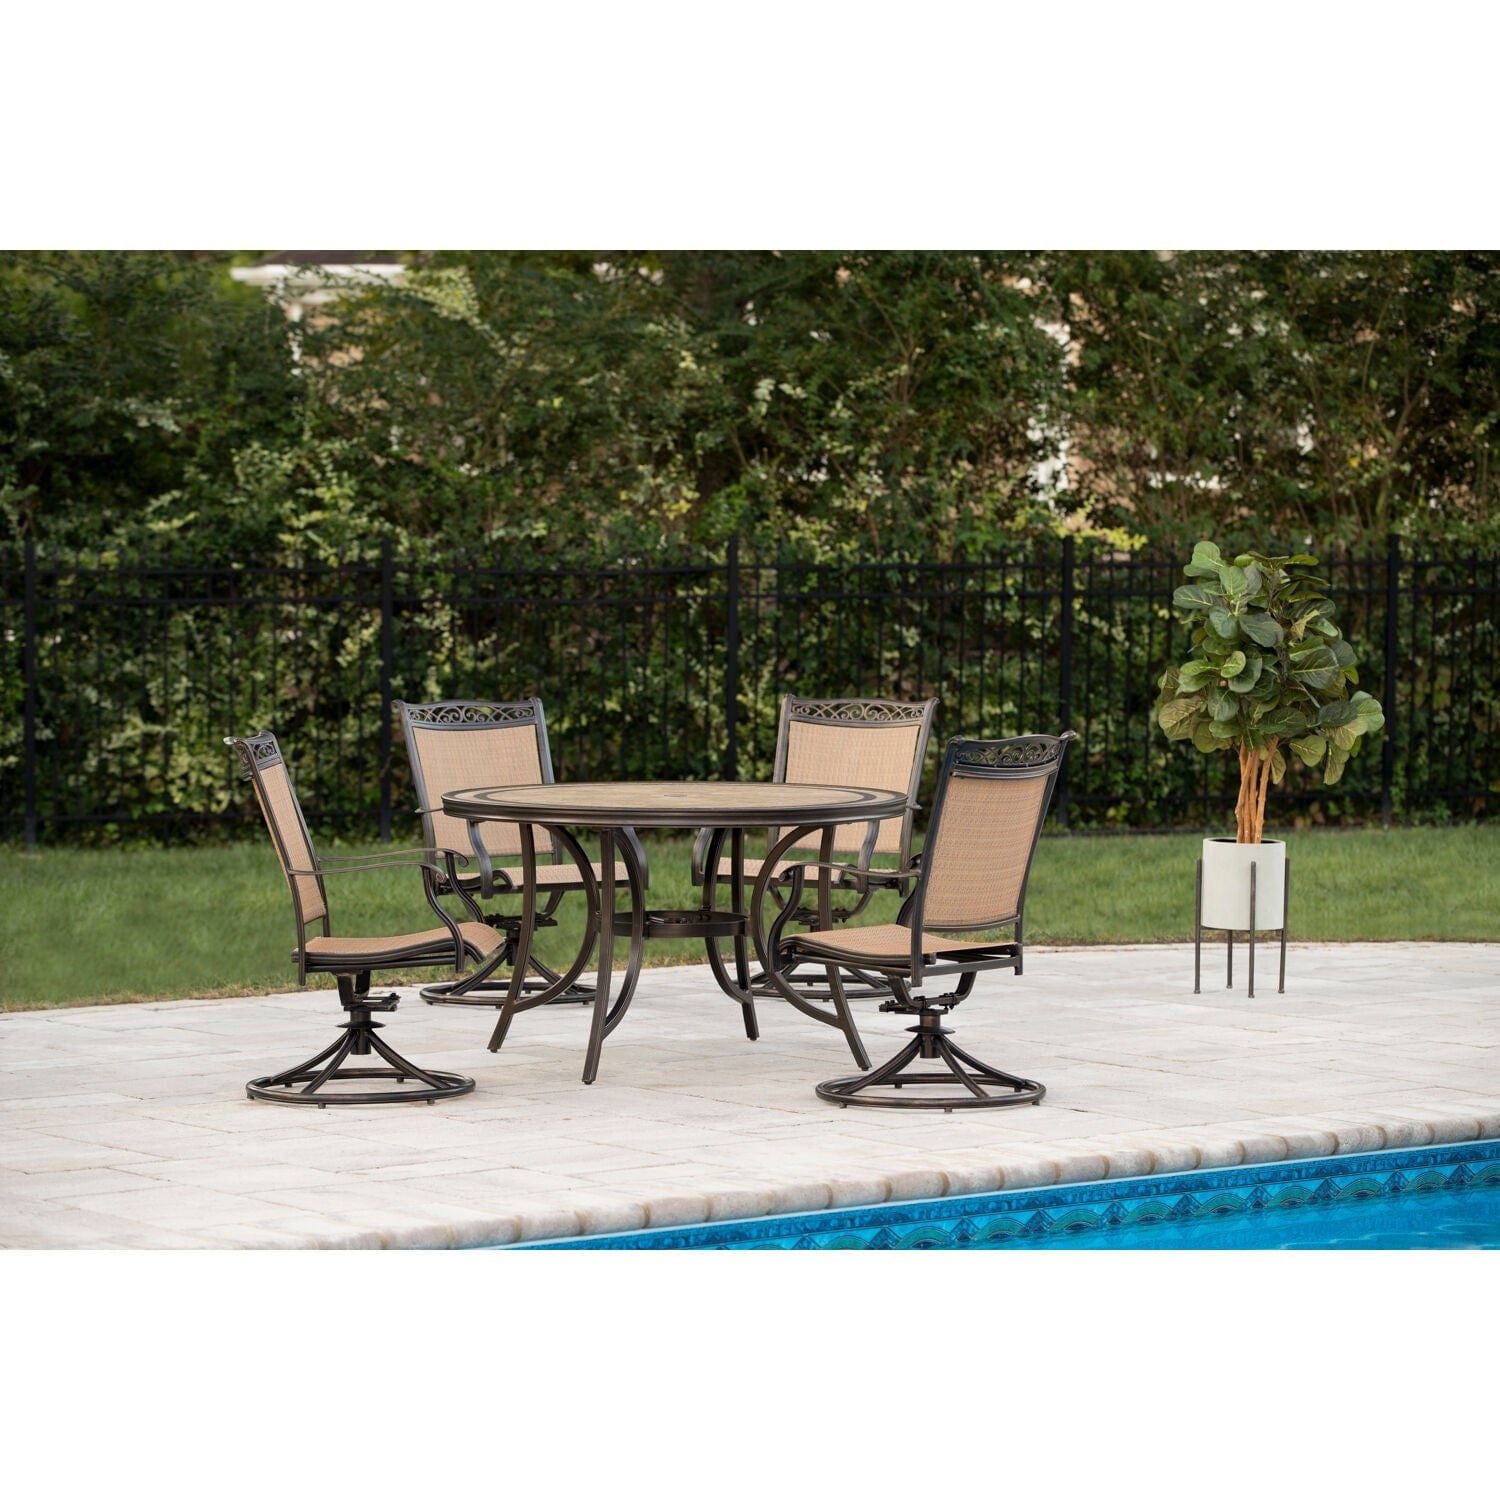 Hanover Outdoor Dining Set Hanover Fontana 5 Piece Outdoor Dining Set with Four Swivel Rockers and a 51 In. Tile-top Dining Table | FNTDN5PCSWTN